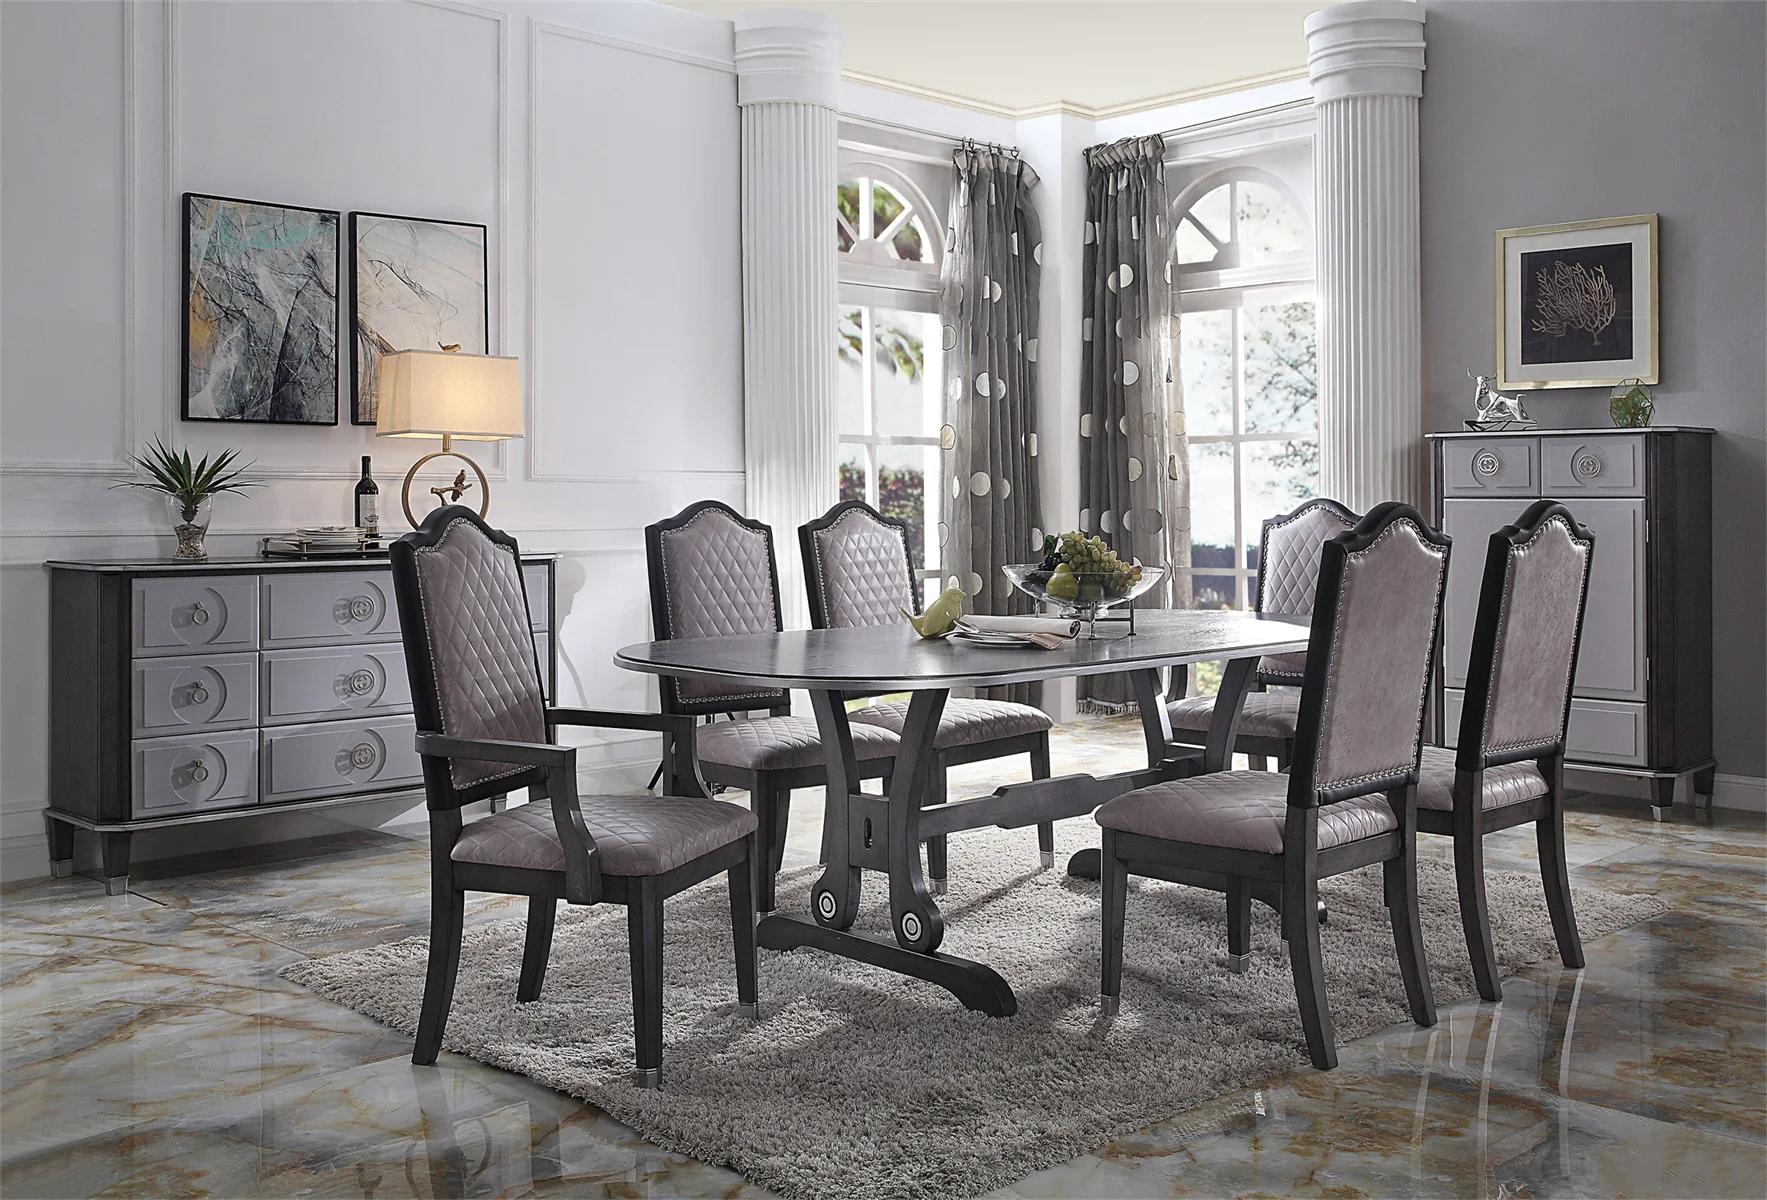 Transitional Dining Room Set House Beatrice 68810-10pcs in Charcoal Fabric